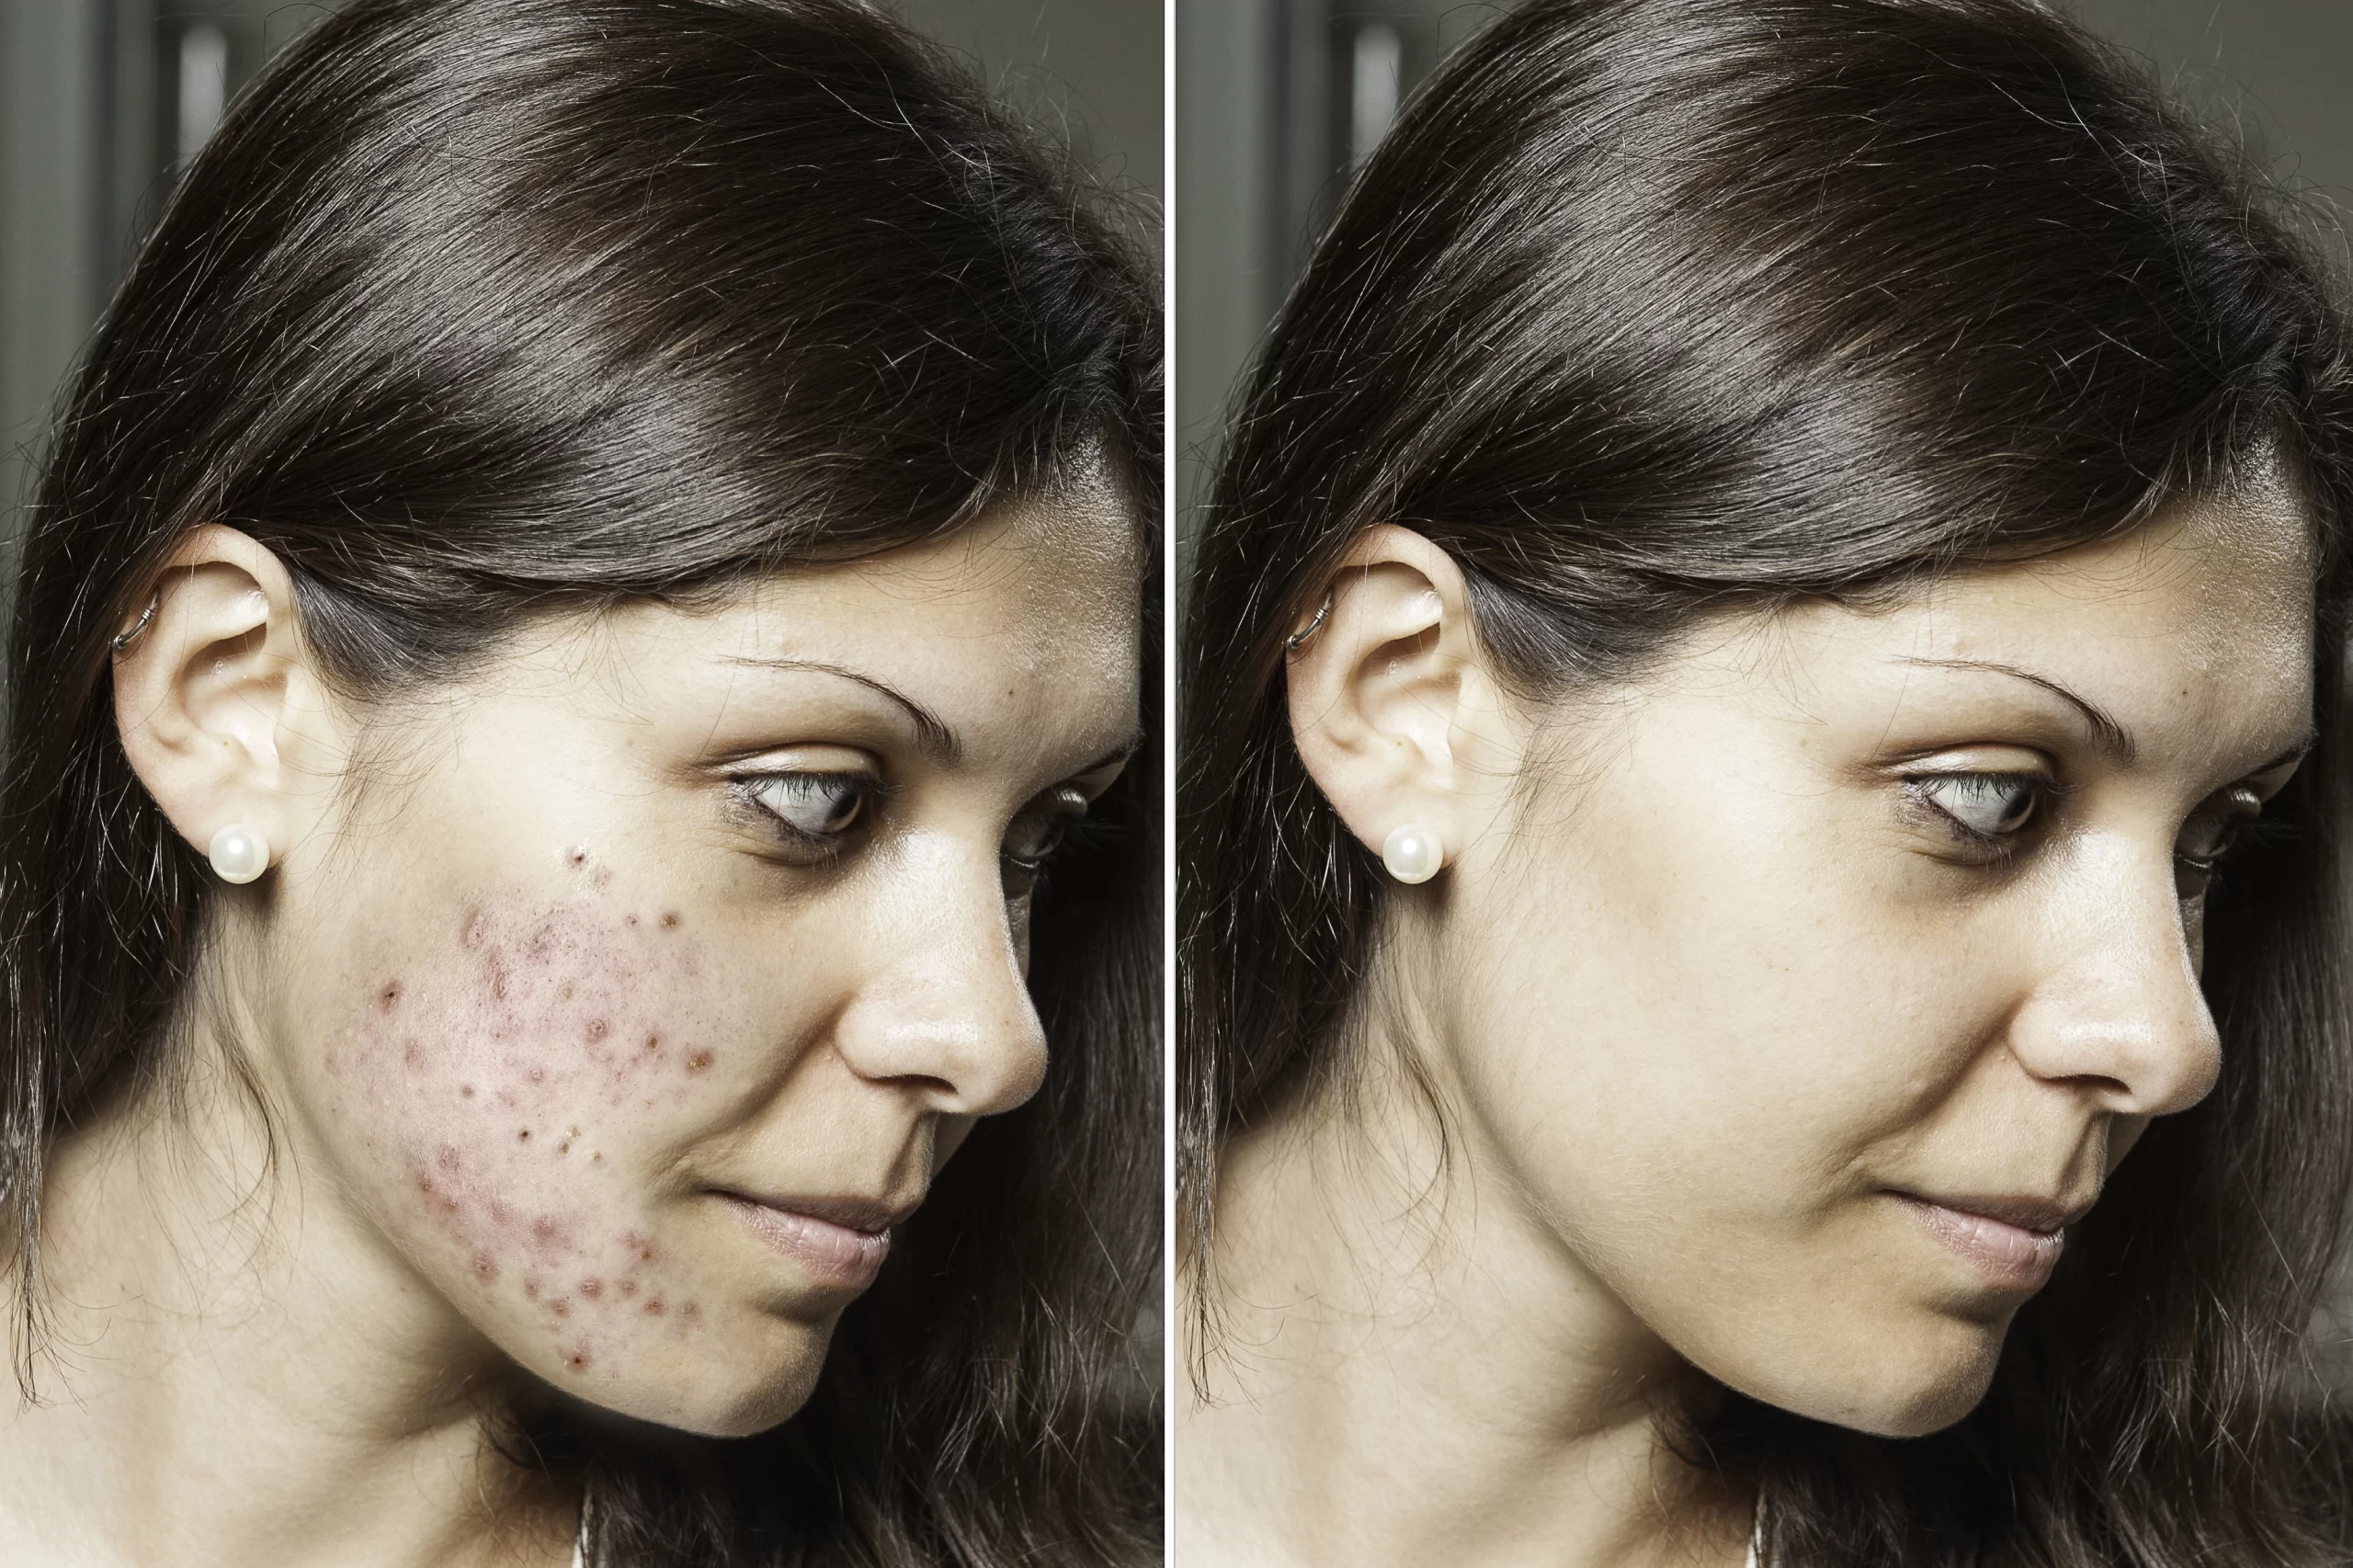 young-woman-with-brunette-hair-shows-before-after-results-successful-acne-treatment-spots-scars-have-been-removed-through-application-prescribed-topical-creams